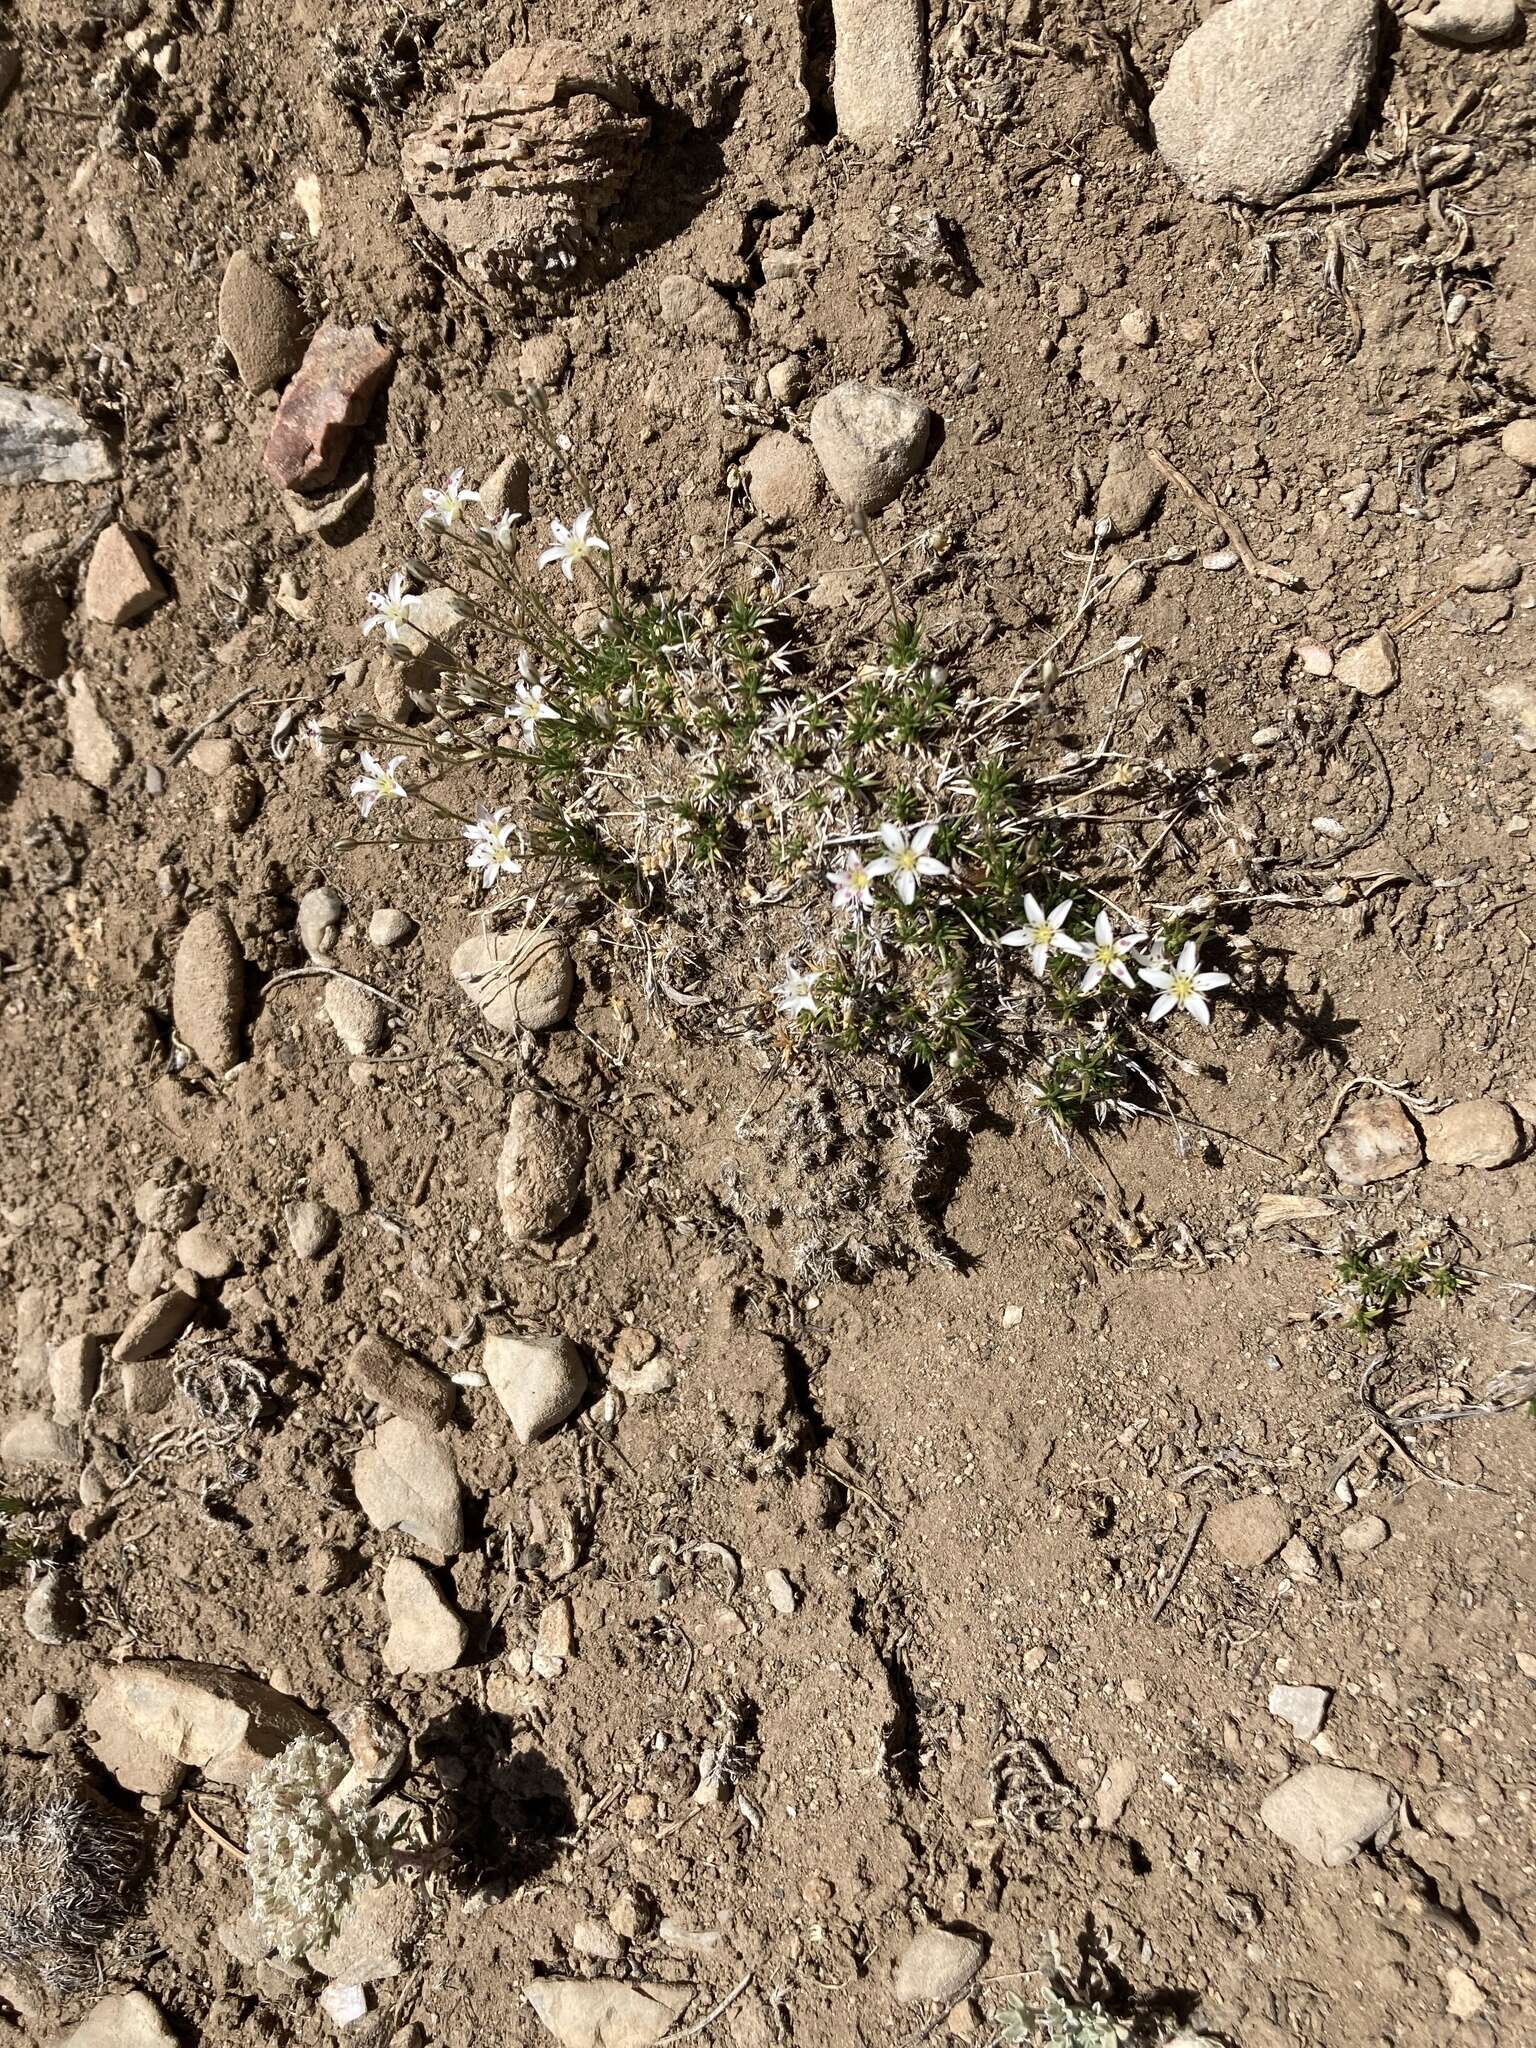 Image of King's compact sandwort